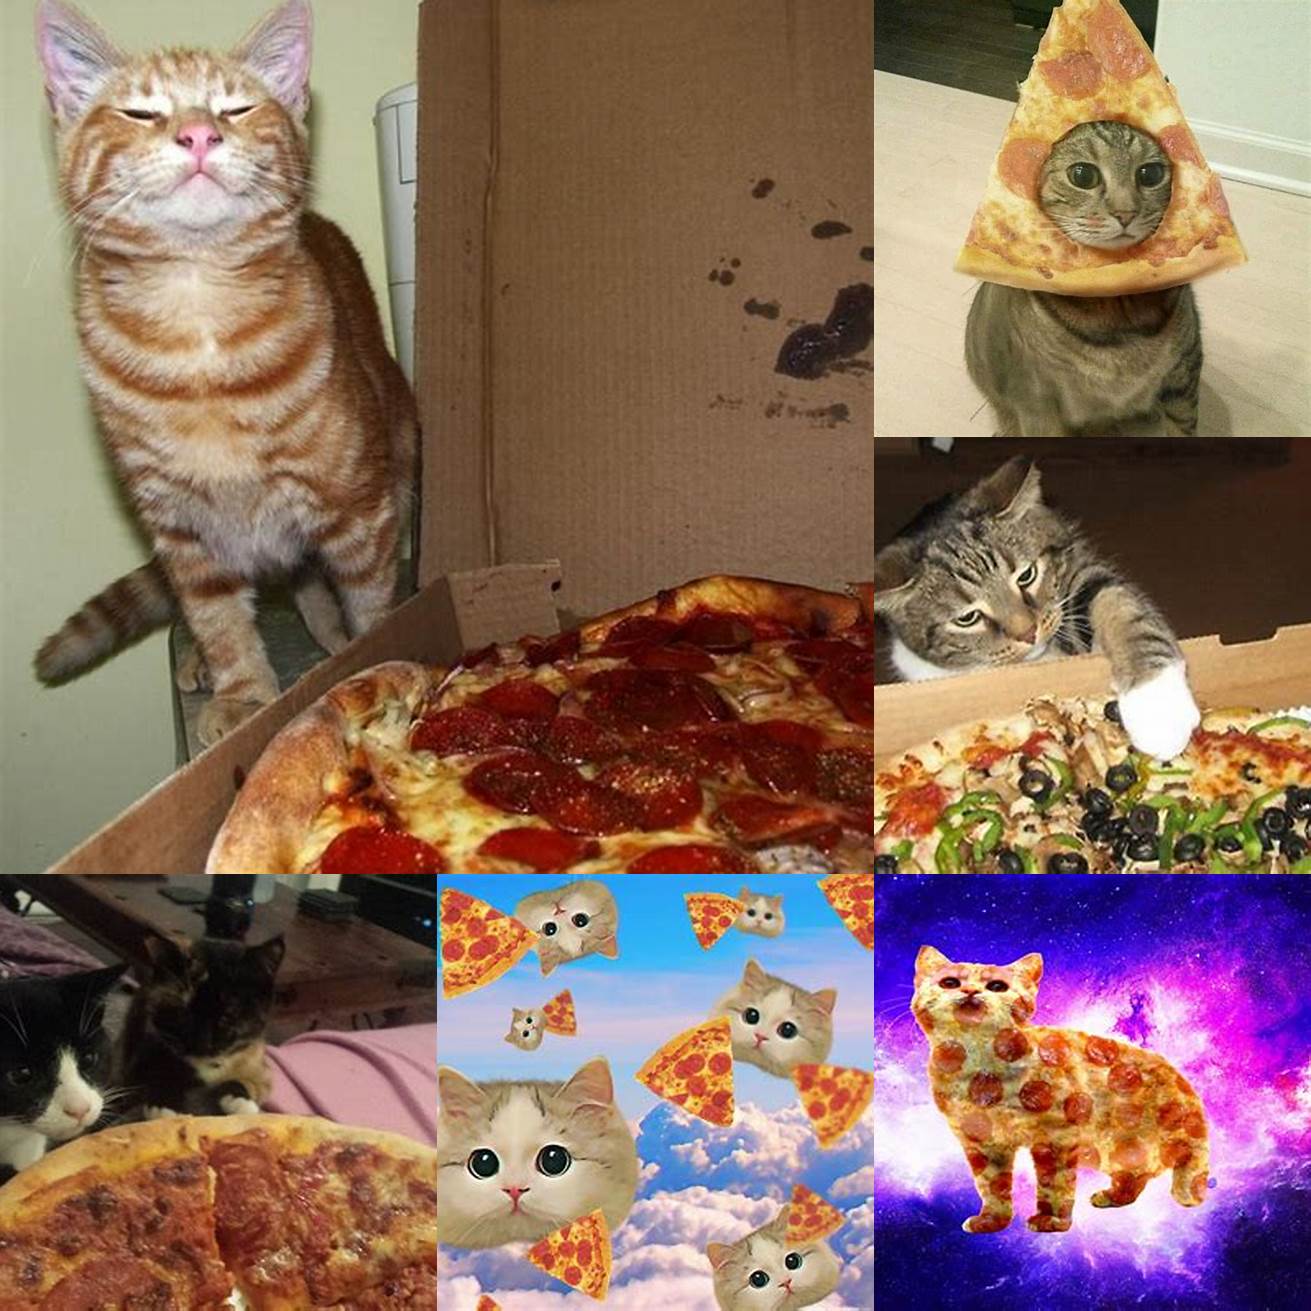 Cat looking down at pizza